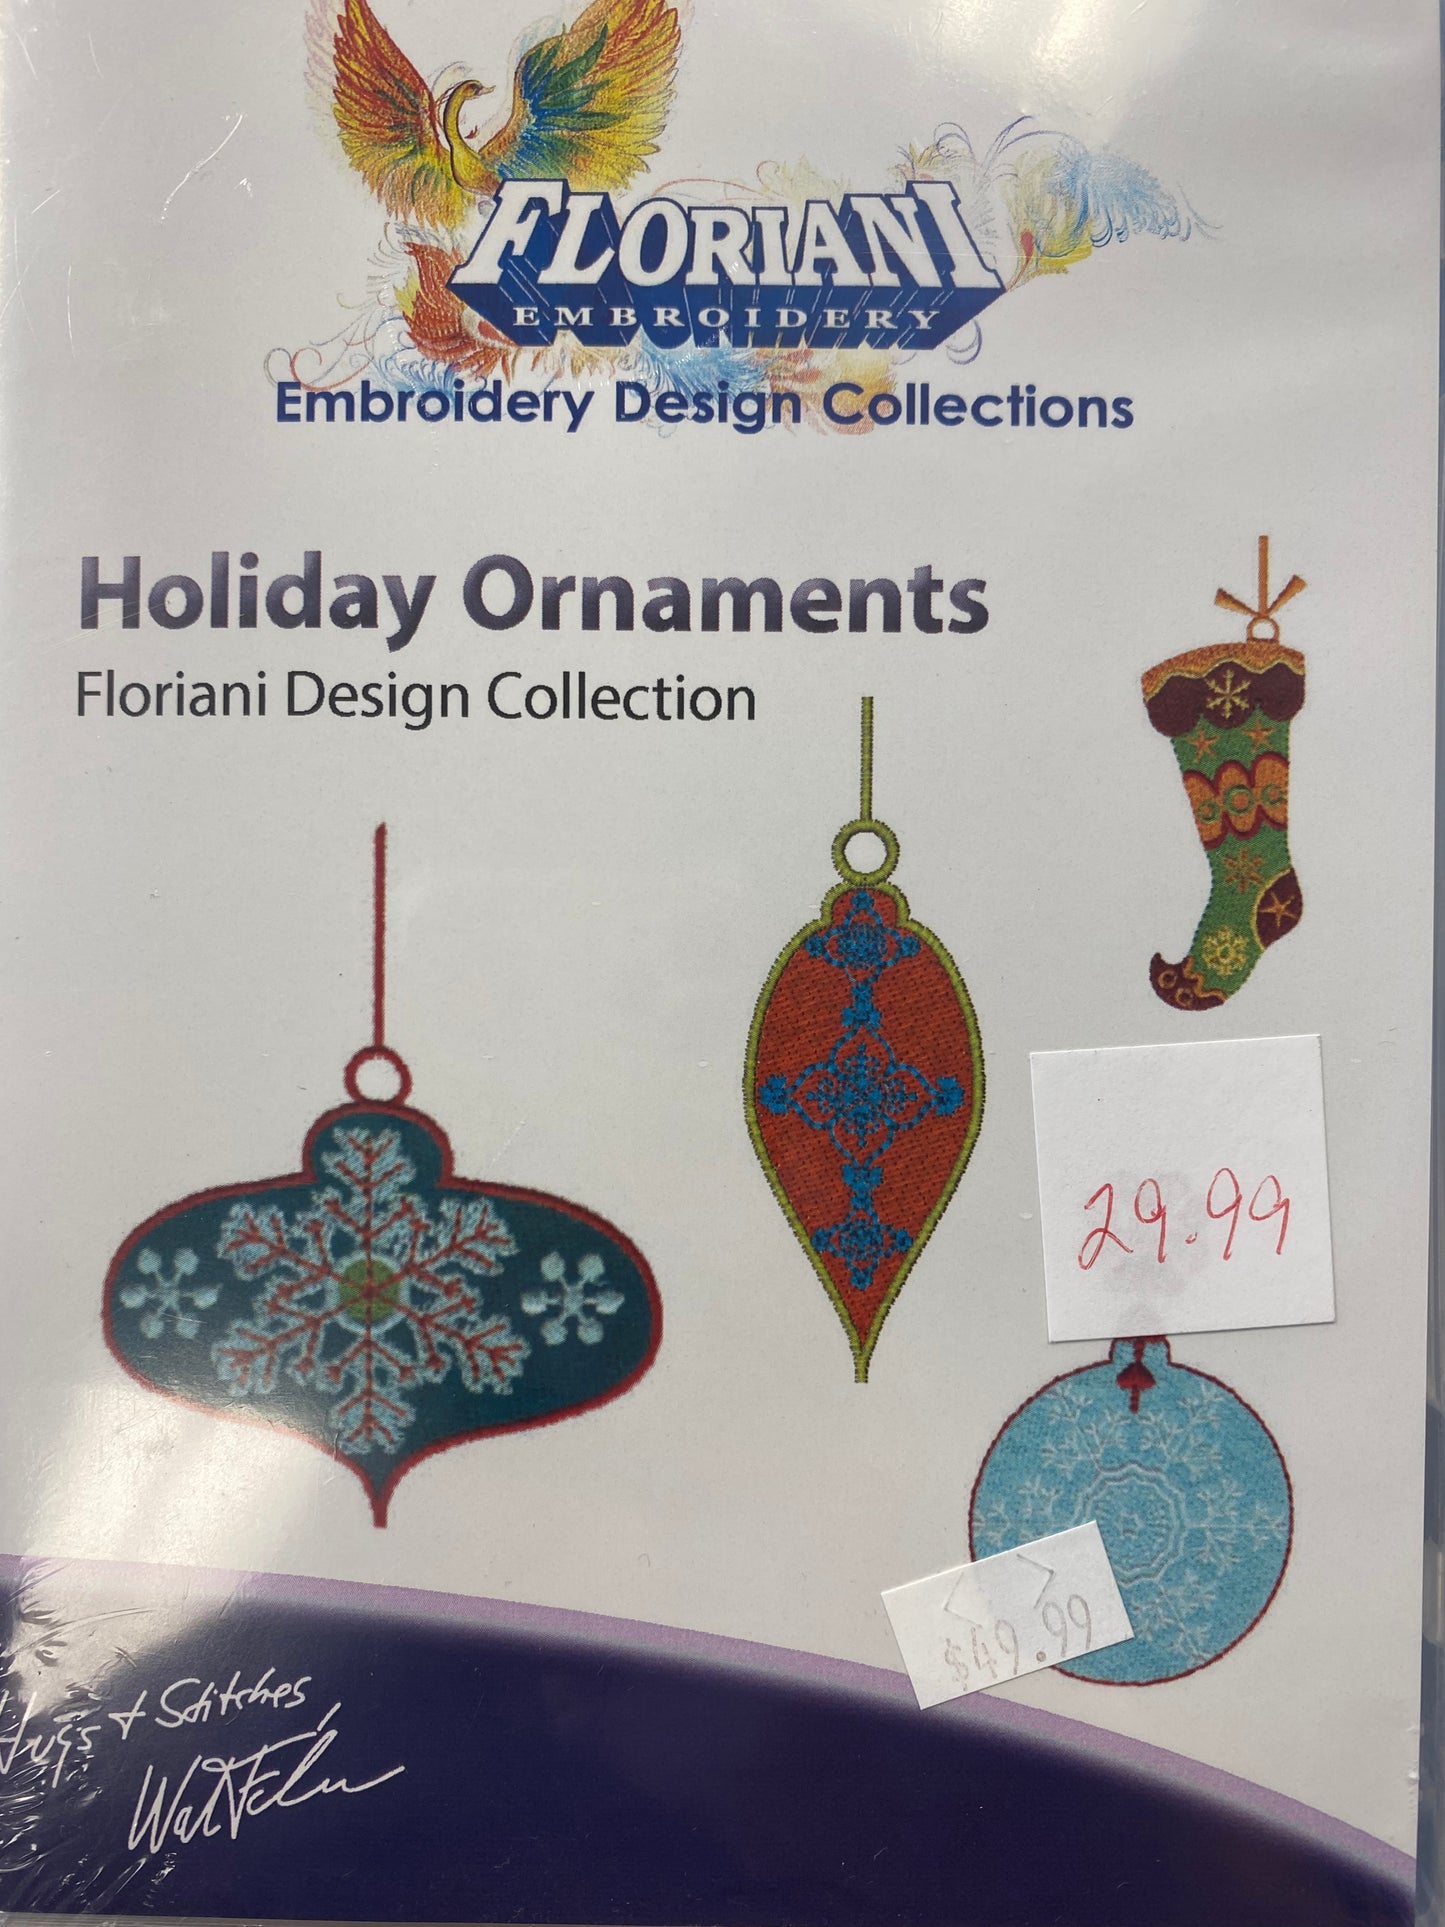 Holiday Ornaments, Embroidery Design